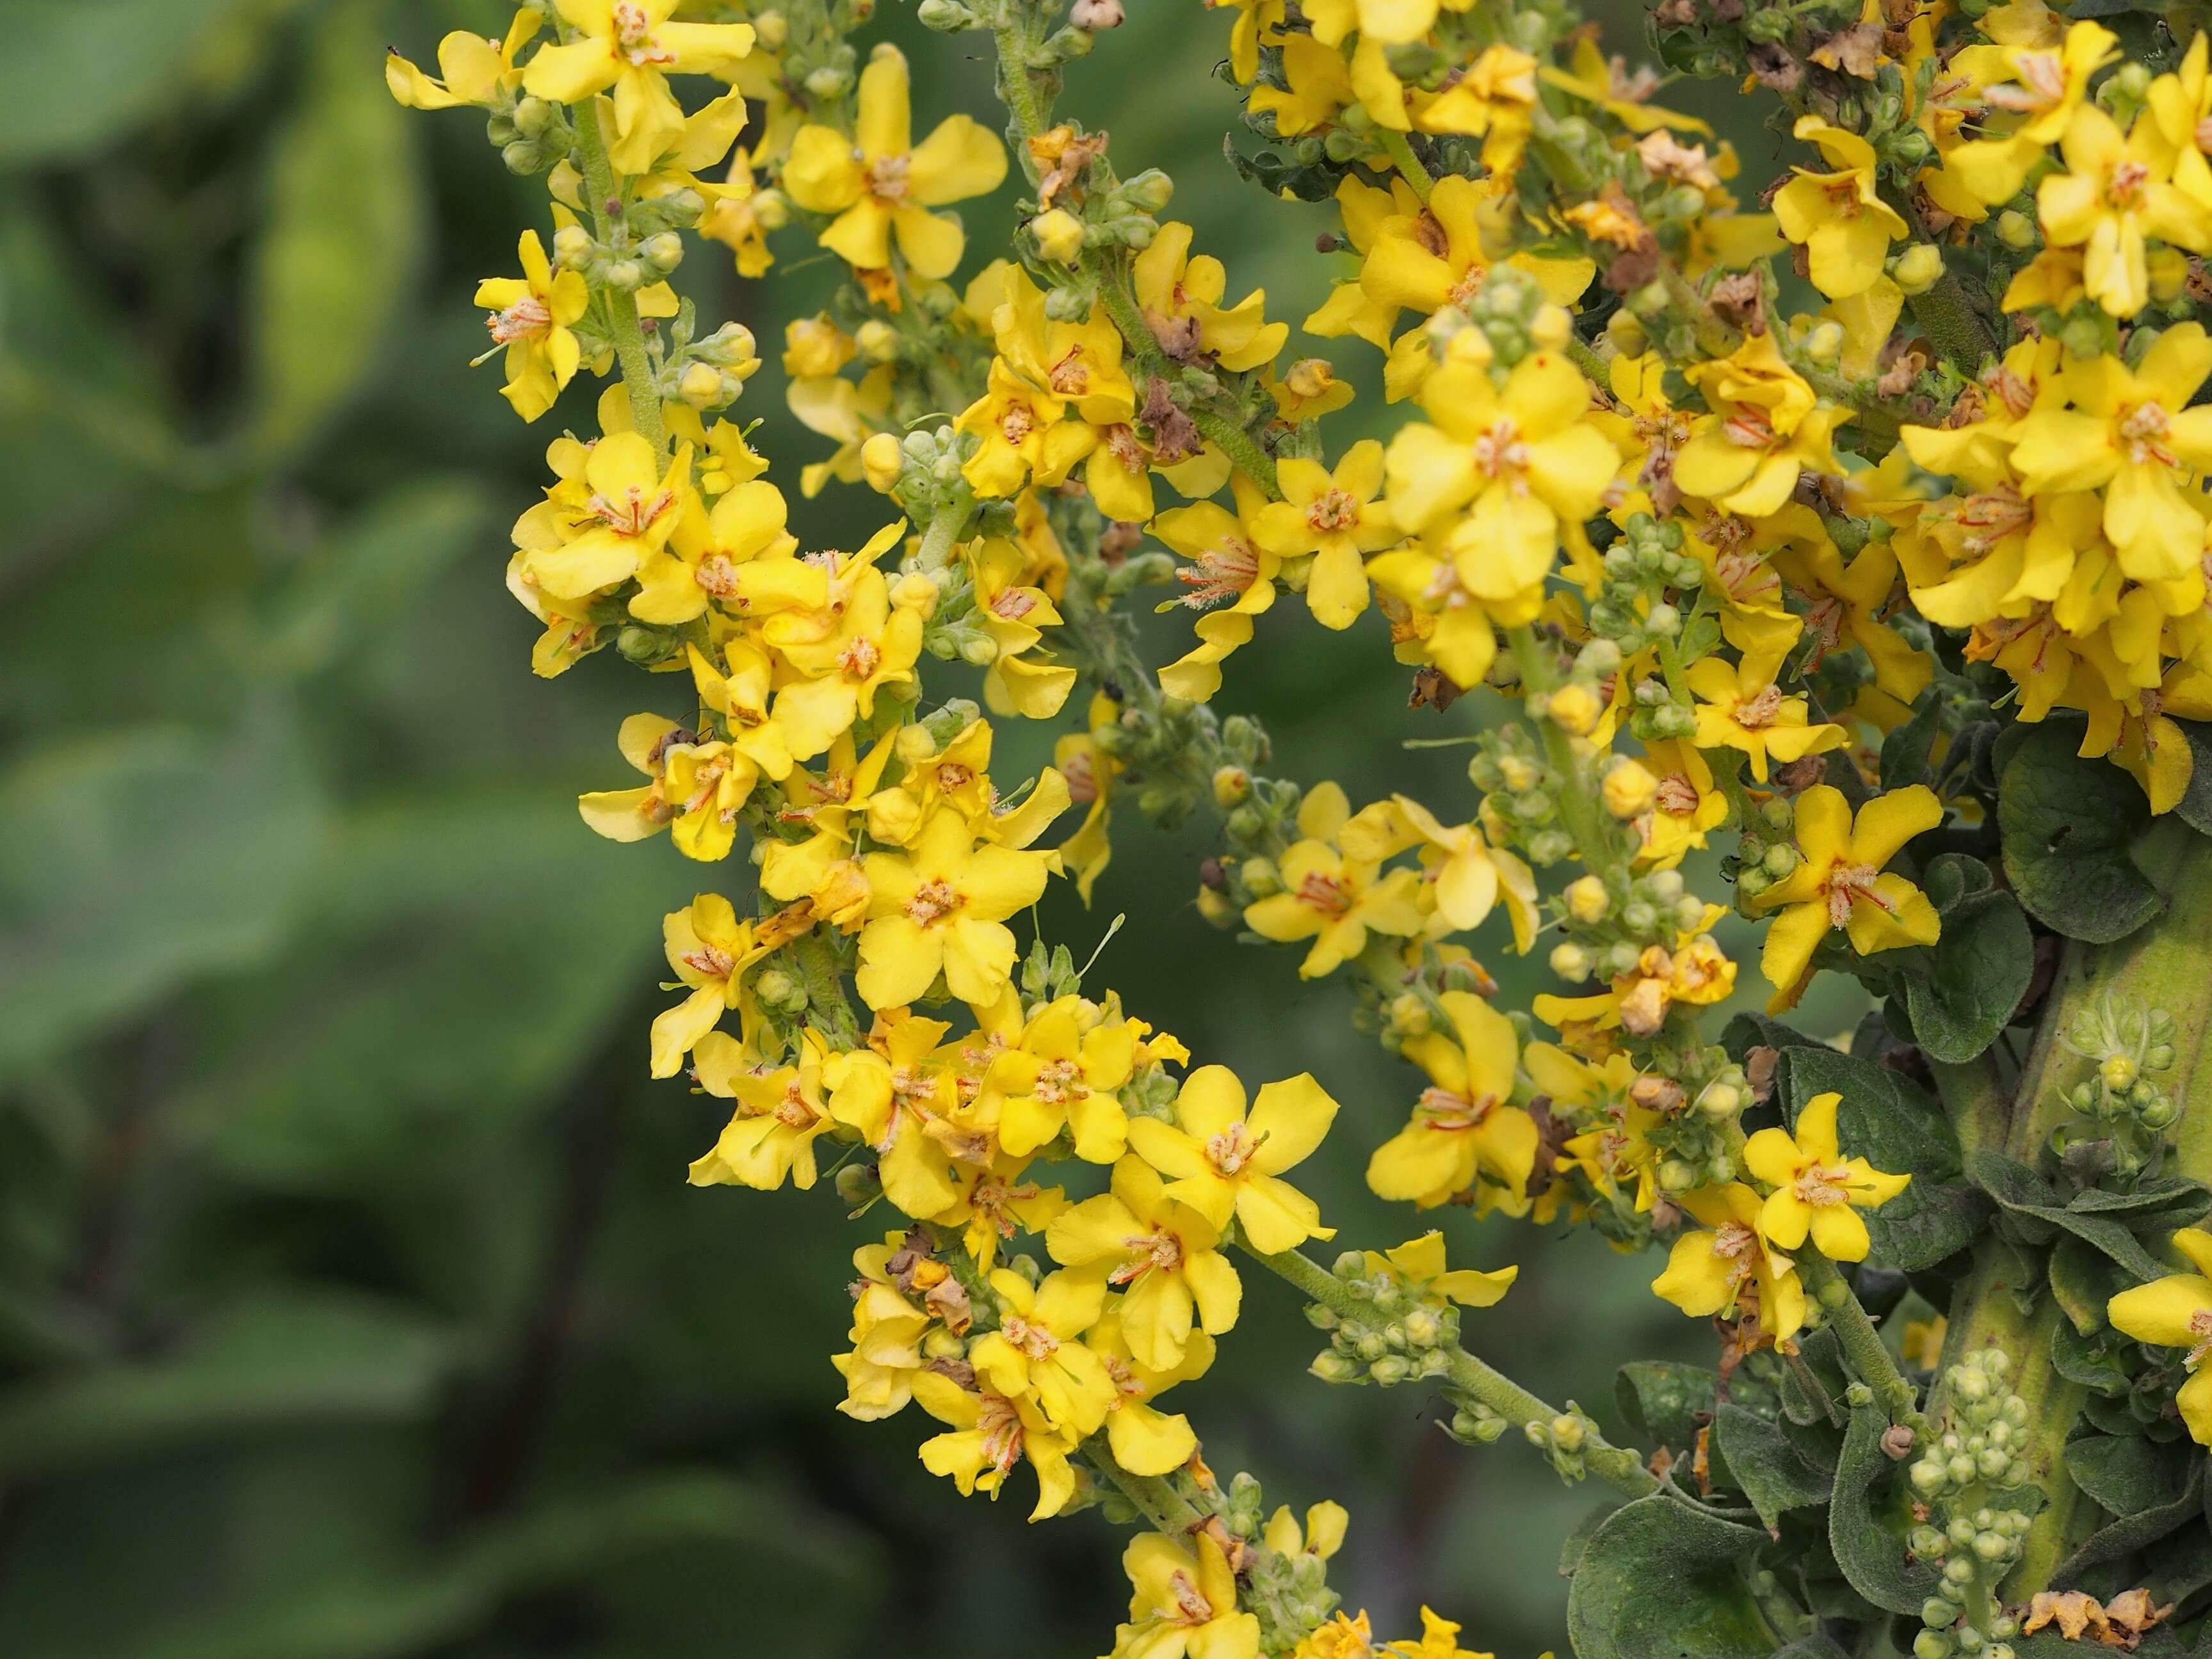 Image of Olympic mullein